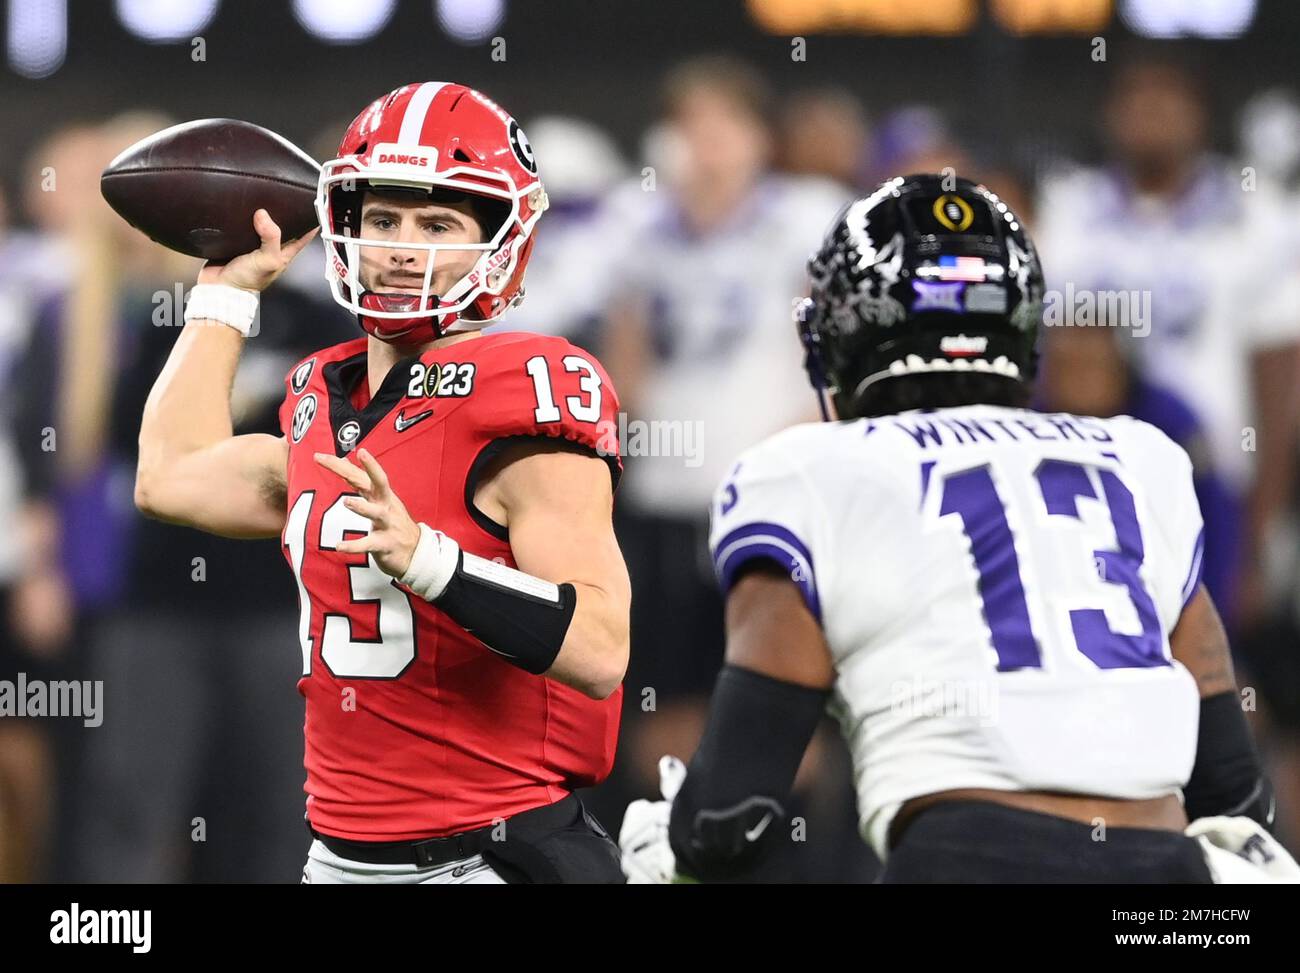 Inglewood, United States. 09th Jan, 2023. Georgia Bulldogs quarterback Stetson Bennett throws a pass in the first quarter against the TCU Horned Frogs at the 2023 NCAA College Football National Championship between Georgia and TCU at SoFi Stadium in Inglewood, California, on Monday, January 9, 2023. Photo by Mike Goulding/UPI Credit: UPI/Alamy Live News Stock Photo